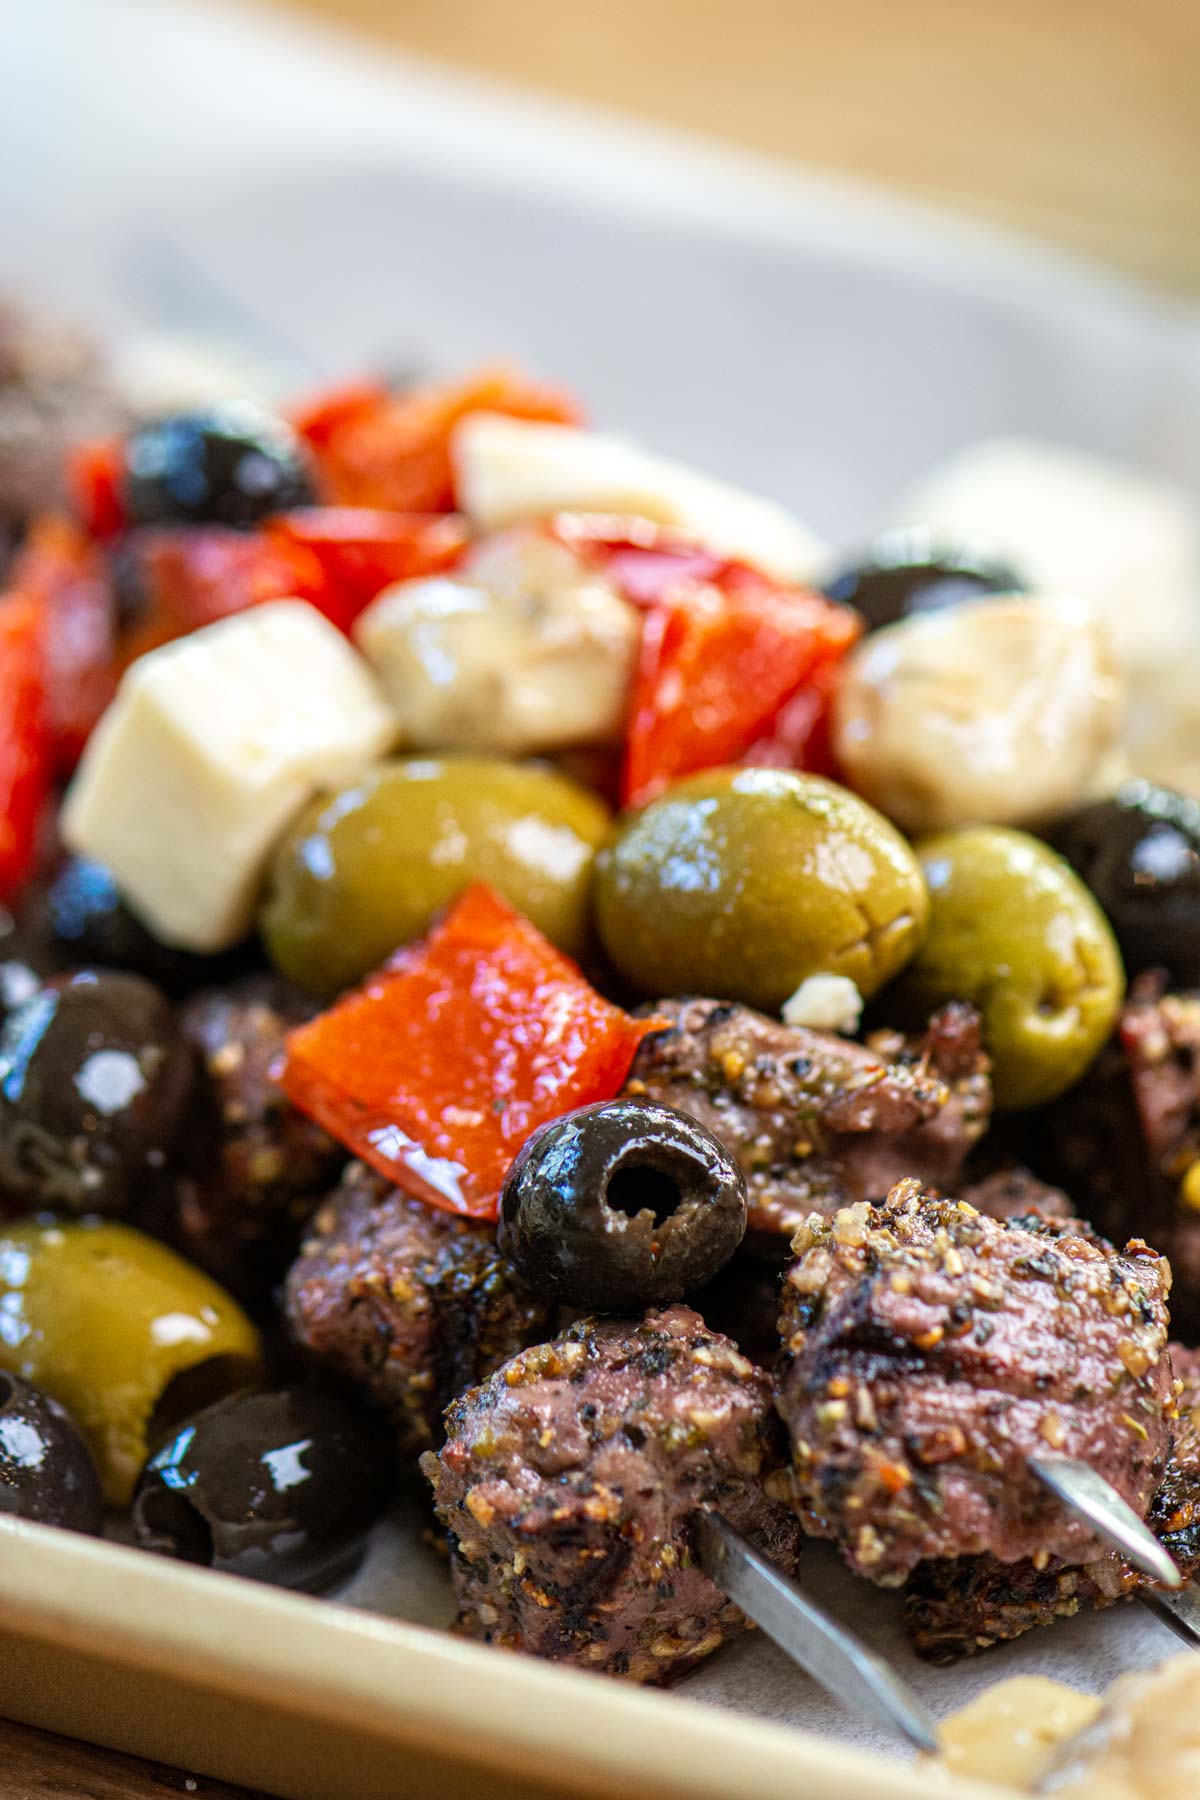 grilled steak bites on metal skewers topped with a greek olive salad mix.